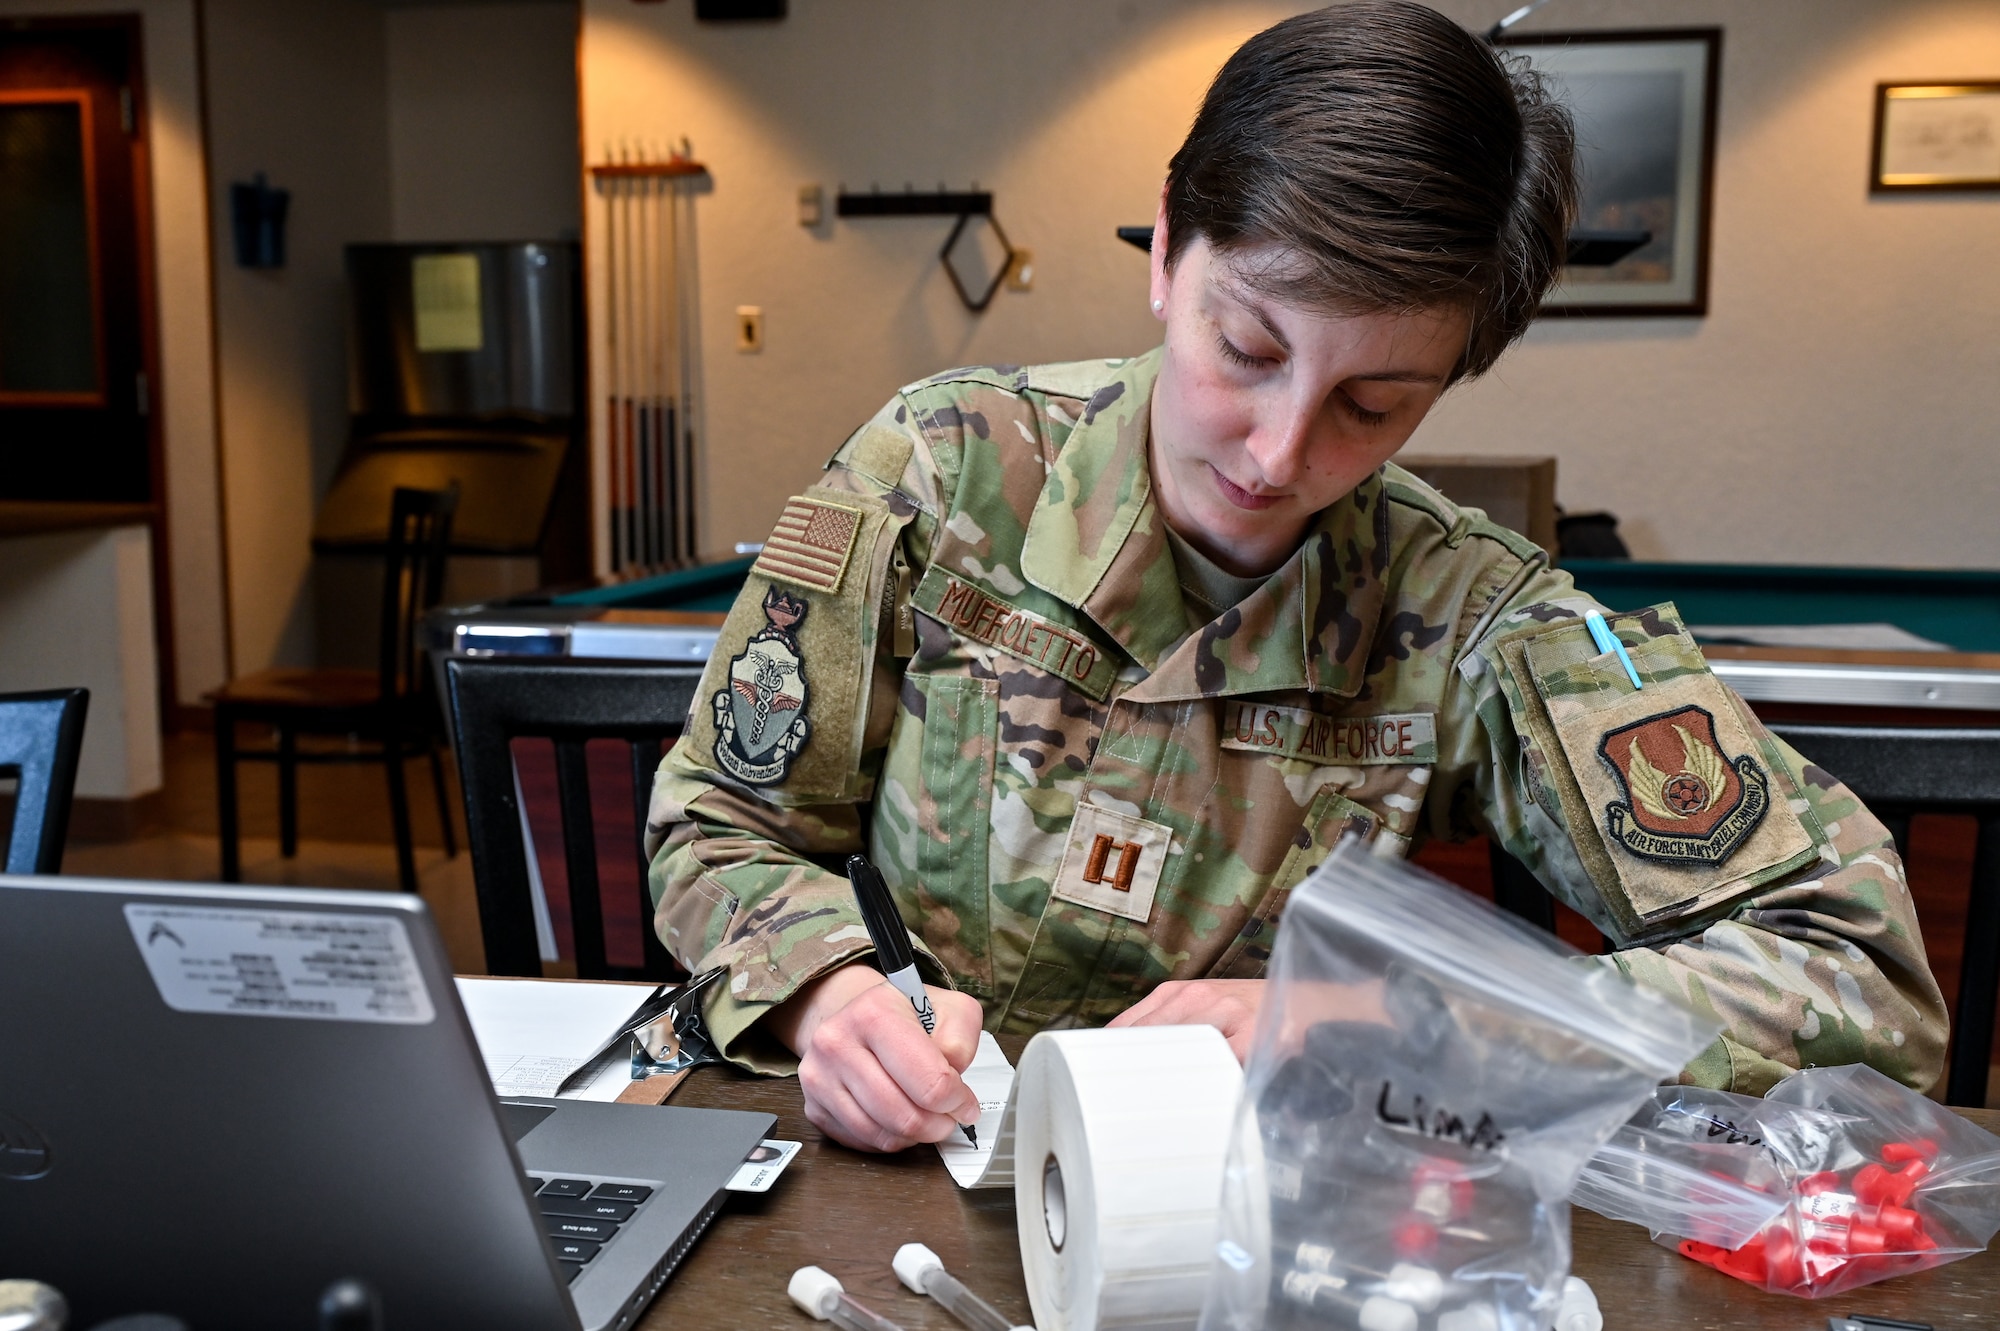 Capt. Isabella Muffoletto, U.S. Air Force School of Aerospace Medicine bioenvironmental engineer, labels different samples at L-01 missile alert facility, or MAF, near Stoneham, Colorado, July 13, 2023. USAFSAM teams visited all of F.E. Warren Air Force Base’s MAFs as part of the ongoing missile community cancer study at all three intercontinental ballistic missile wings in Air Force Global Strike Command. While there, the teams assessed indoor air quality at each facility to include temperature, humidity, carbon dioxide and carbon monoxide levels. They also collected water and soil samples and tested for the presence of radon, polychlorinated biphenyls, organic phosphates and other potential occupational exposure hazards. USAFSAM is part of the Air Force Research Laboratory’s 711th Human Performance Wing. (U.S. Air Force photo by Joseph Coslett Jr.)